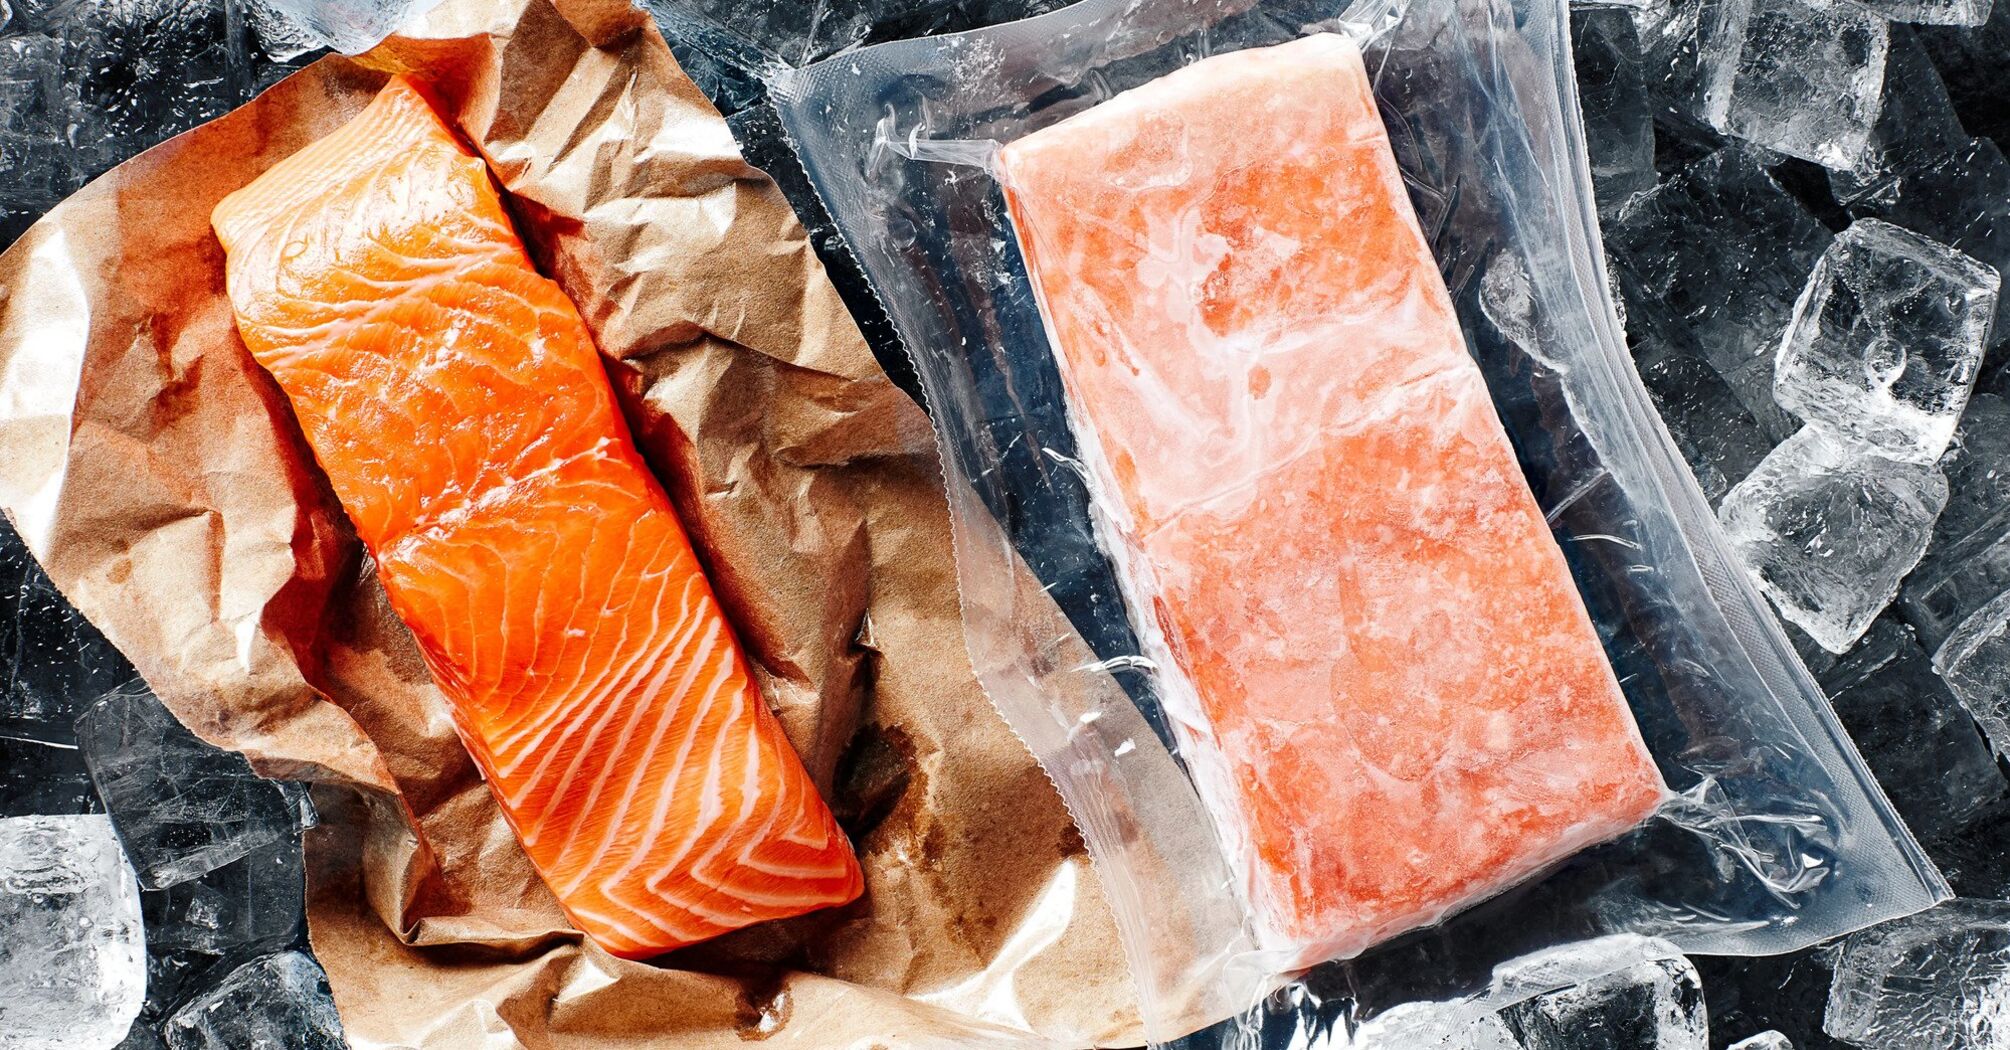 How to defrost fish quickly